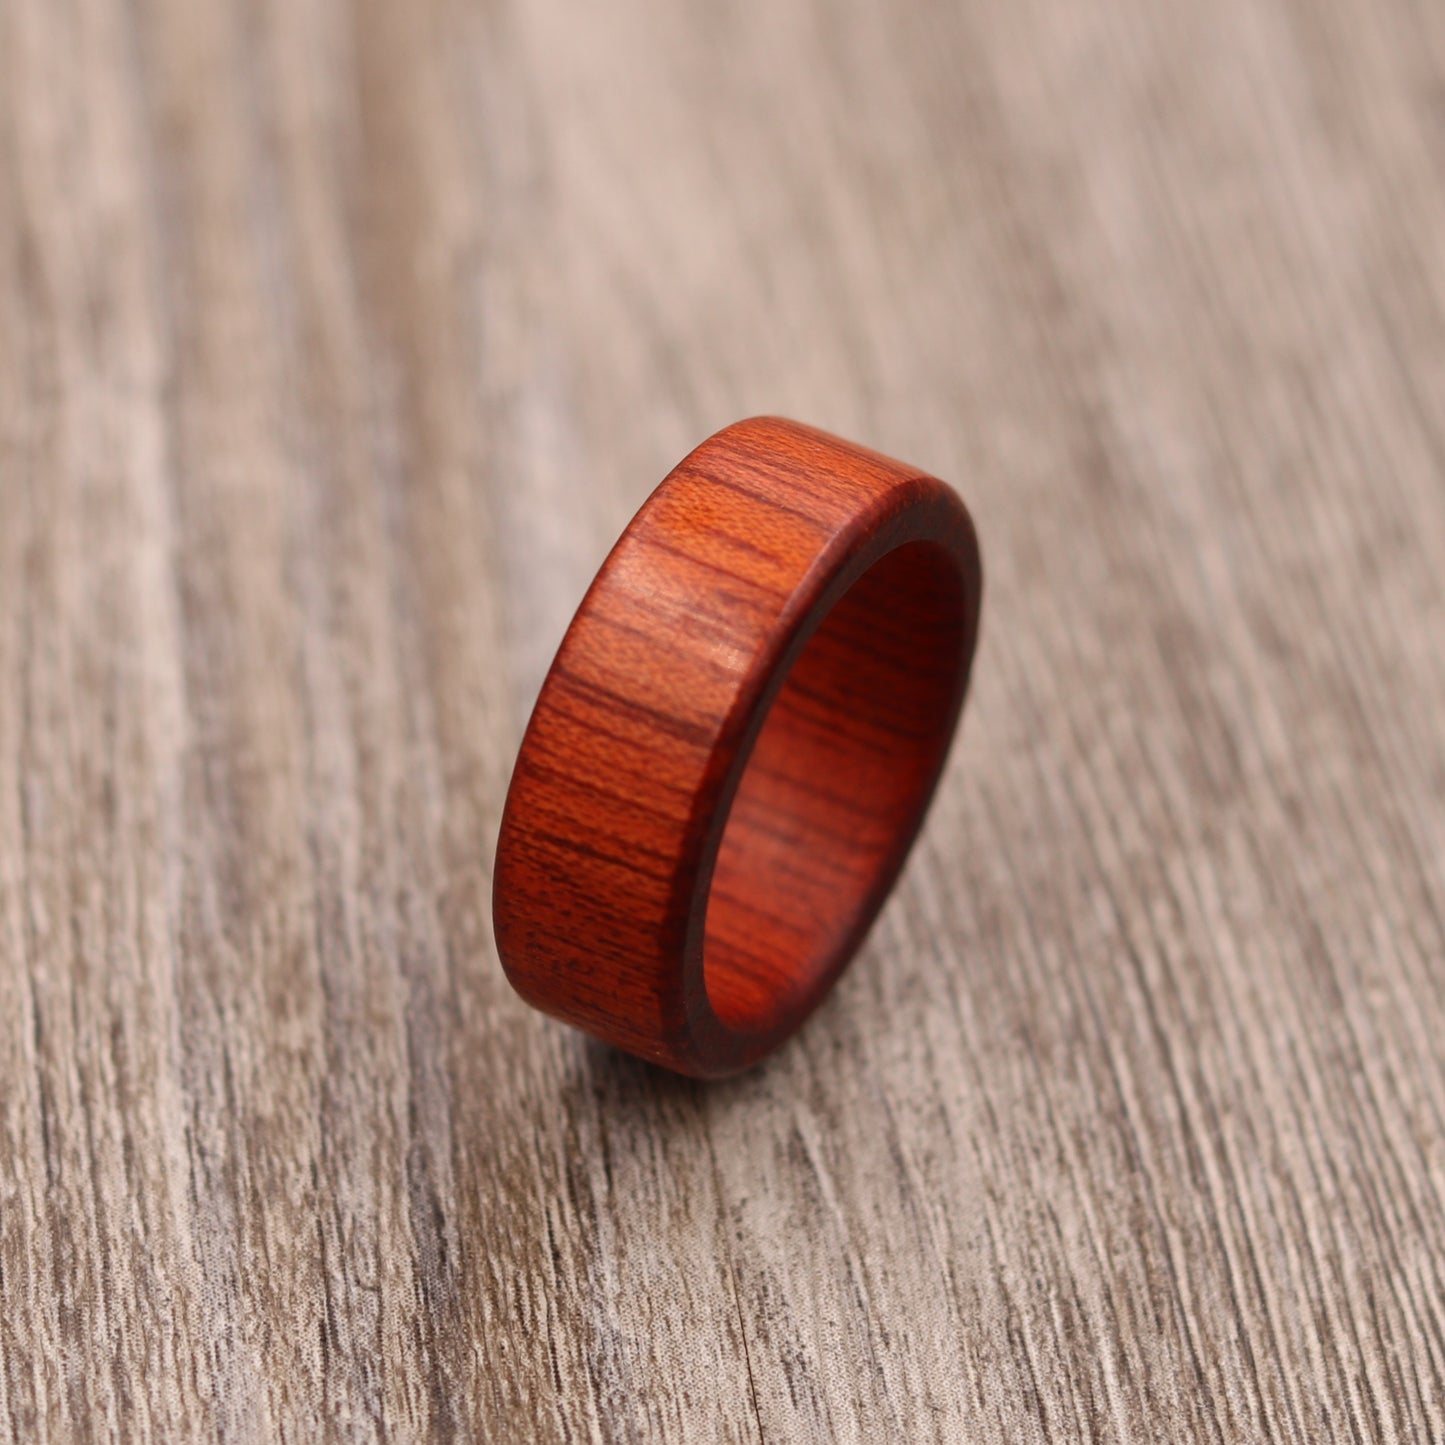 Bloodwood Wood Ring - Plain and/or Personalized